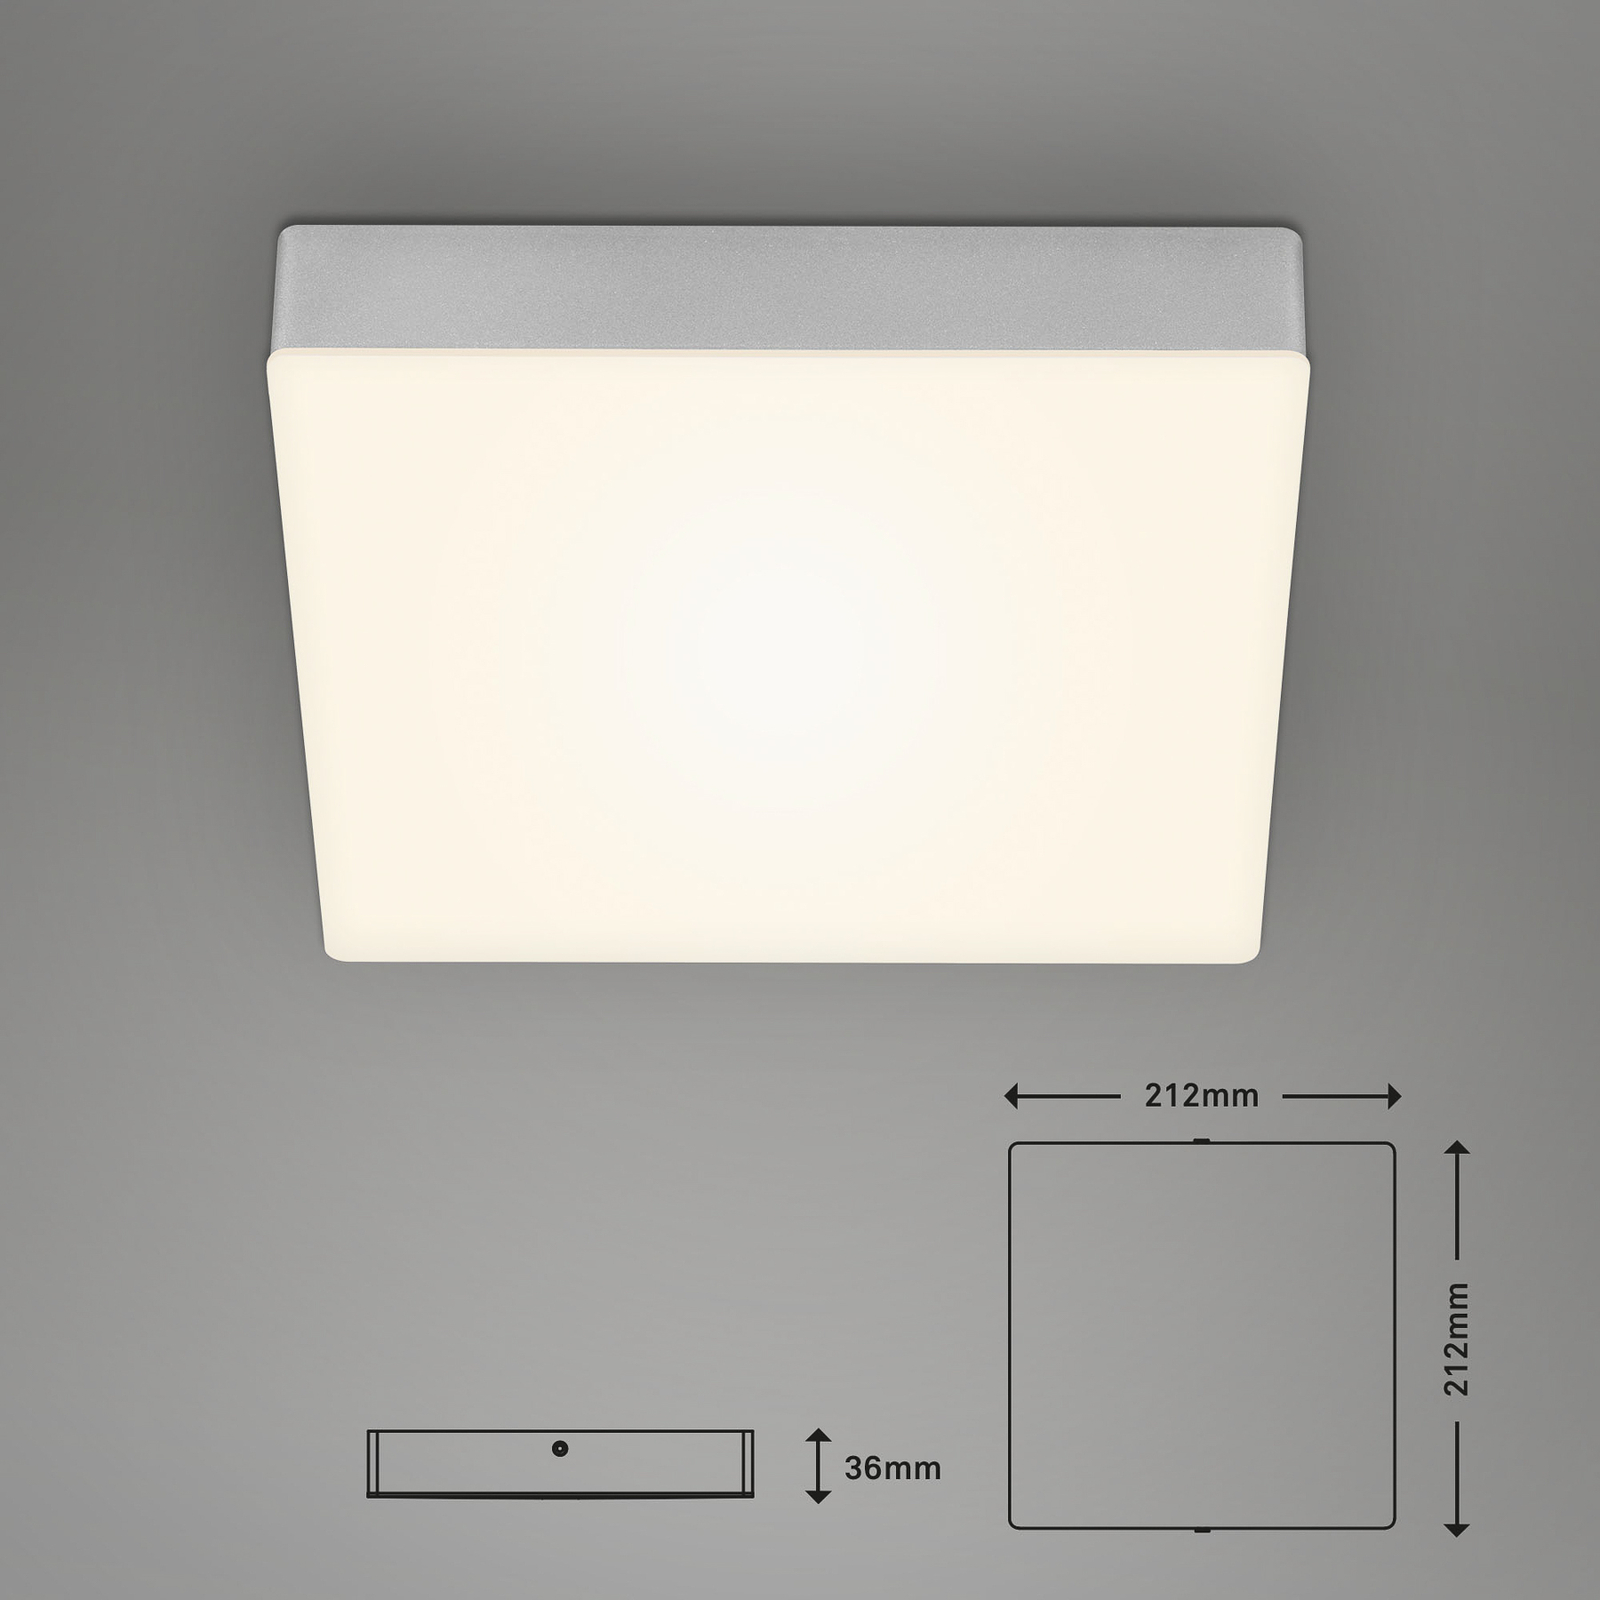 LED ceiling light Flame, 21.2 x 21.2 cm, silver